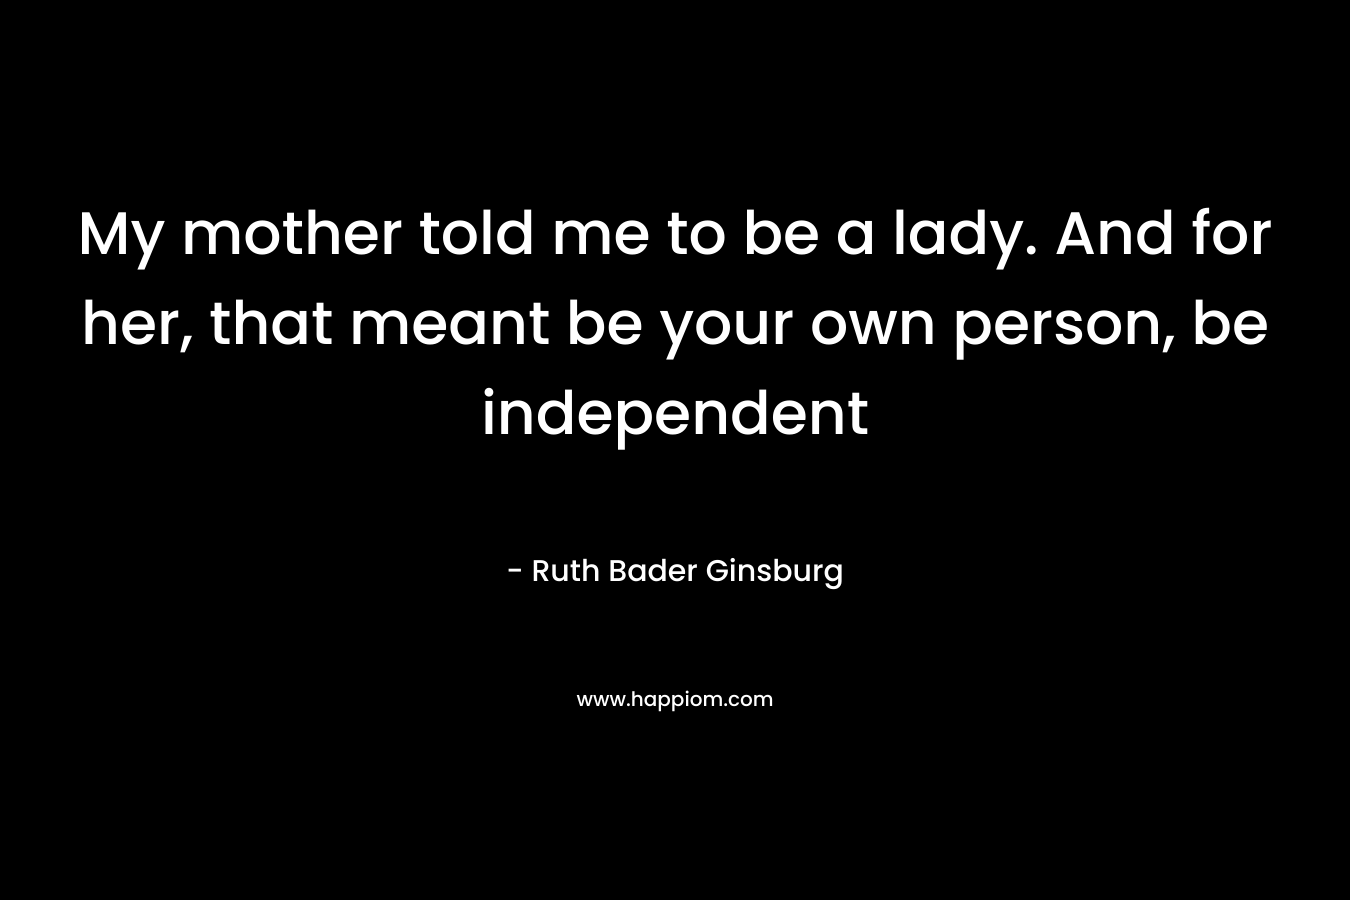 My mother told me to be a lady. And for her, that meant be your own person, be independent – Ruth Bader Ginsburg